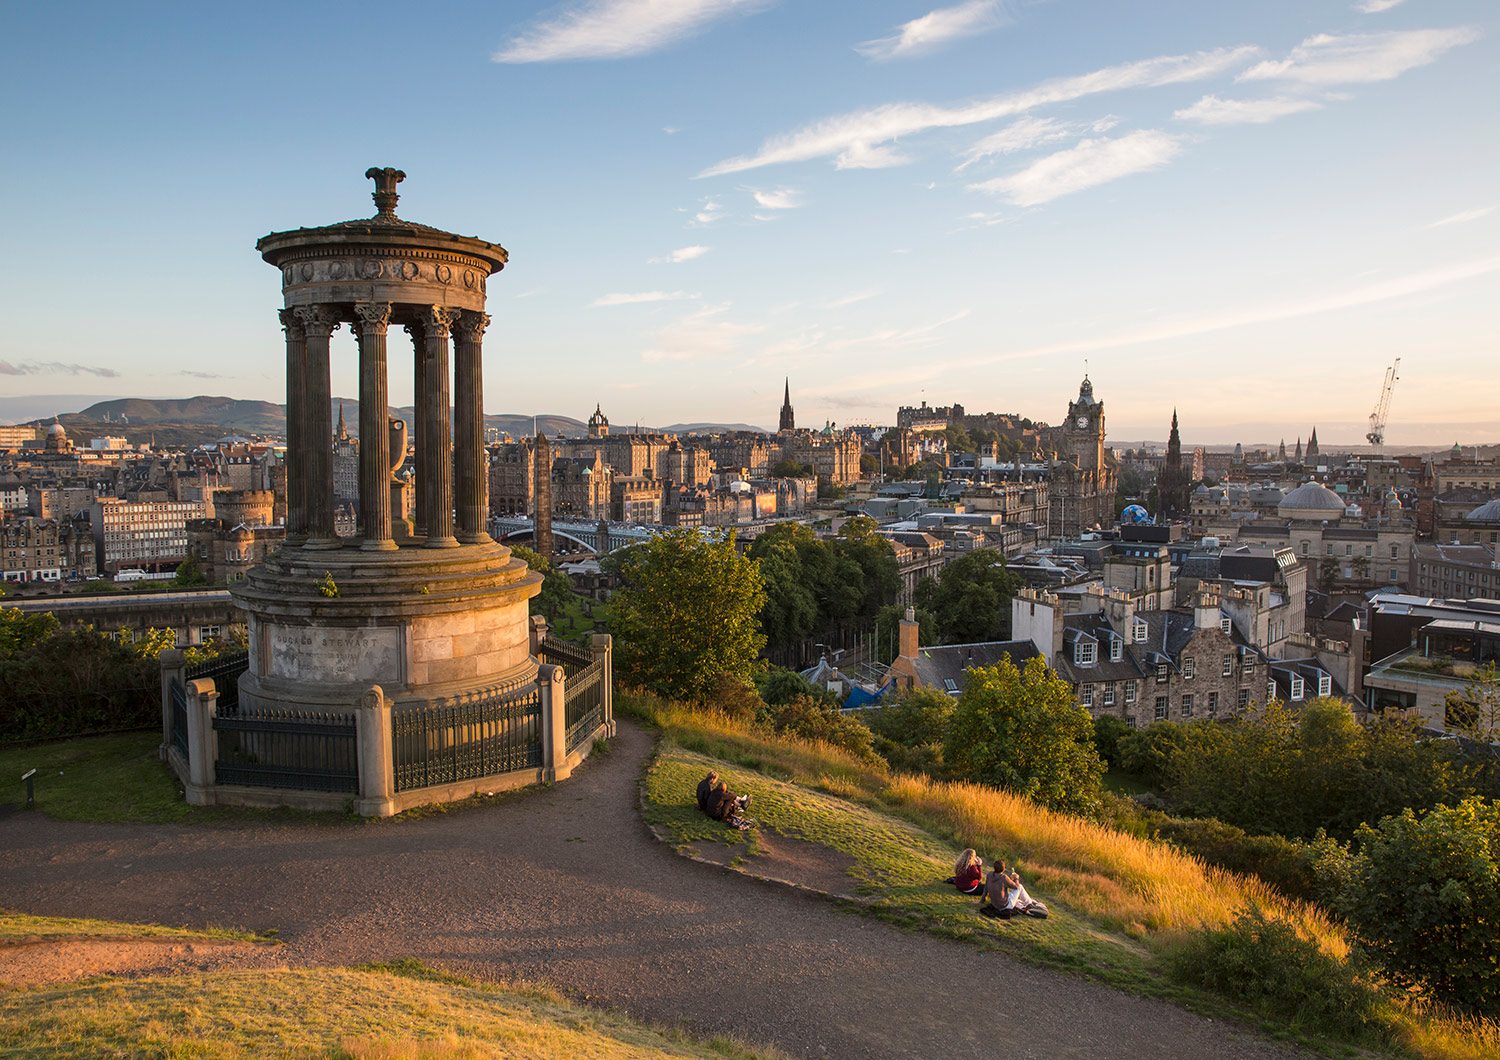 Looking across Edinburgh from Calton hill, with the Dugald Stewart Monument in the forground.